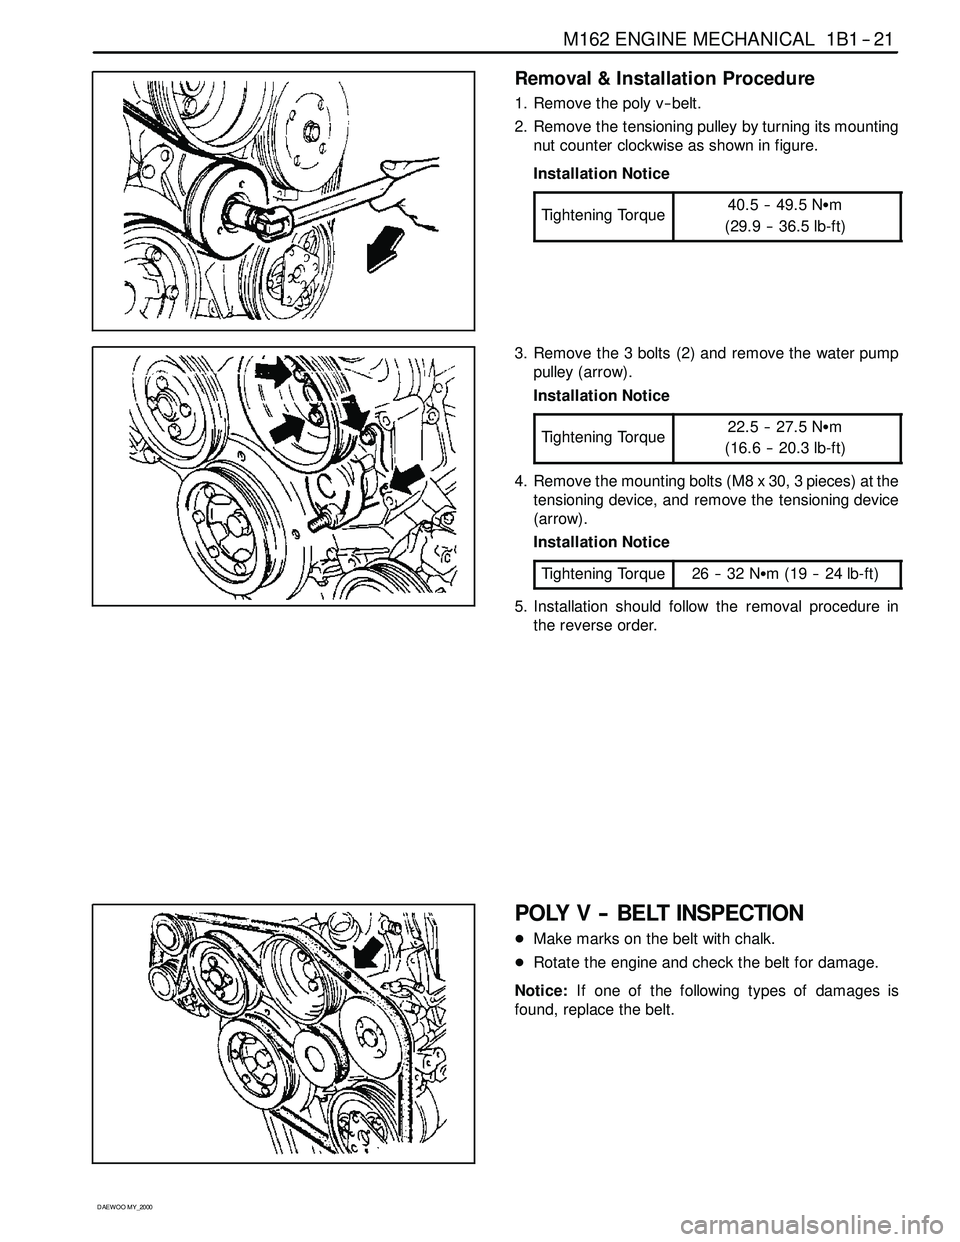 SSANGYONG KORANDO 1997  Service Repair Manual M162 ENGINE MECHANICAL 1B1 -- 21
D AEW OO M Y_2000
Removal & Installation Procedure
1. Remove the poly v -- belt.
2. Remove the tensioning pulley by turning its mounting
nut counter clockwise as shown